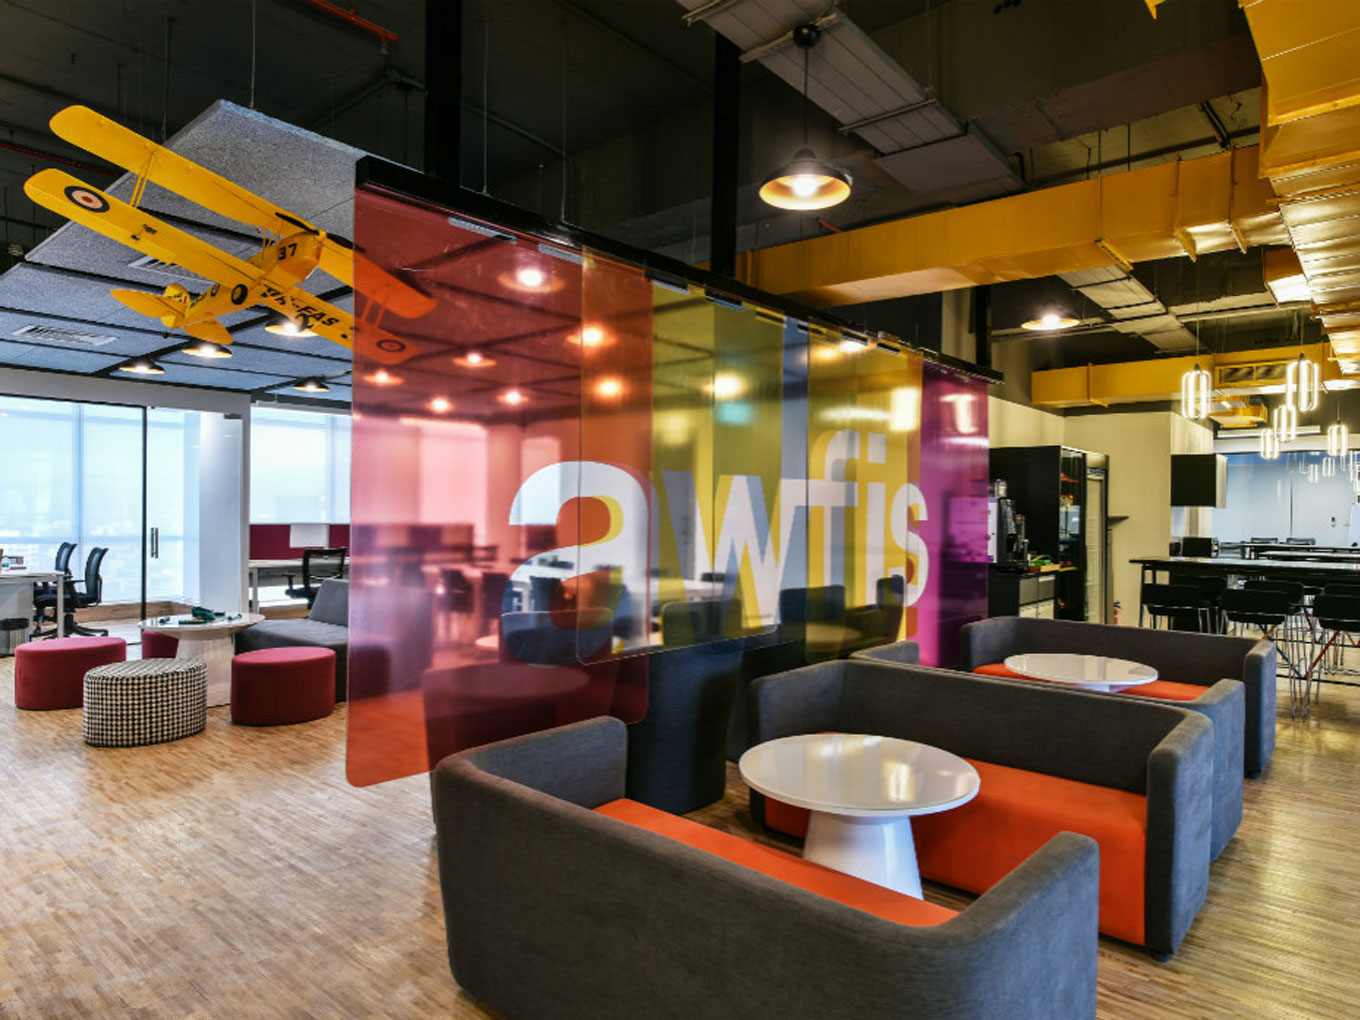 Coworking Space Provider Awfis Raises $20 Mn Series C Funding